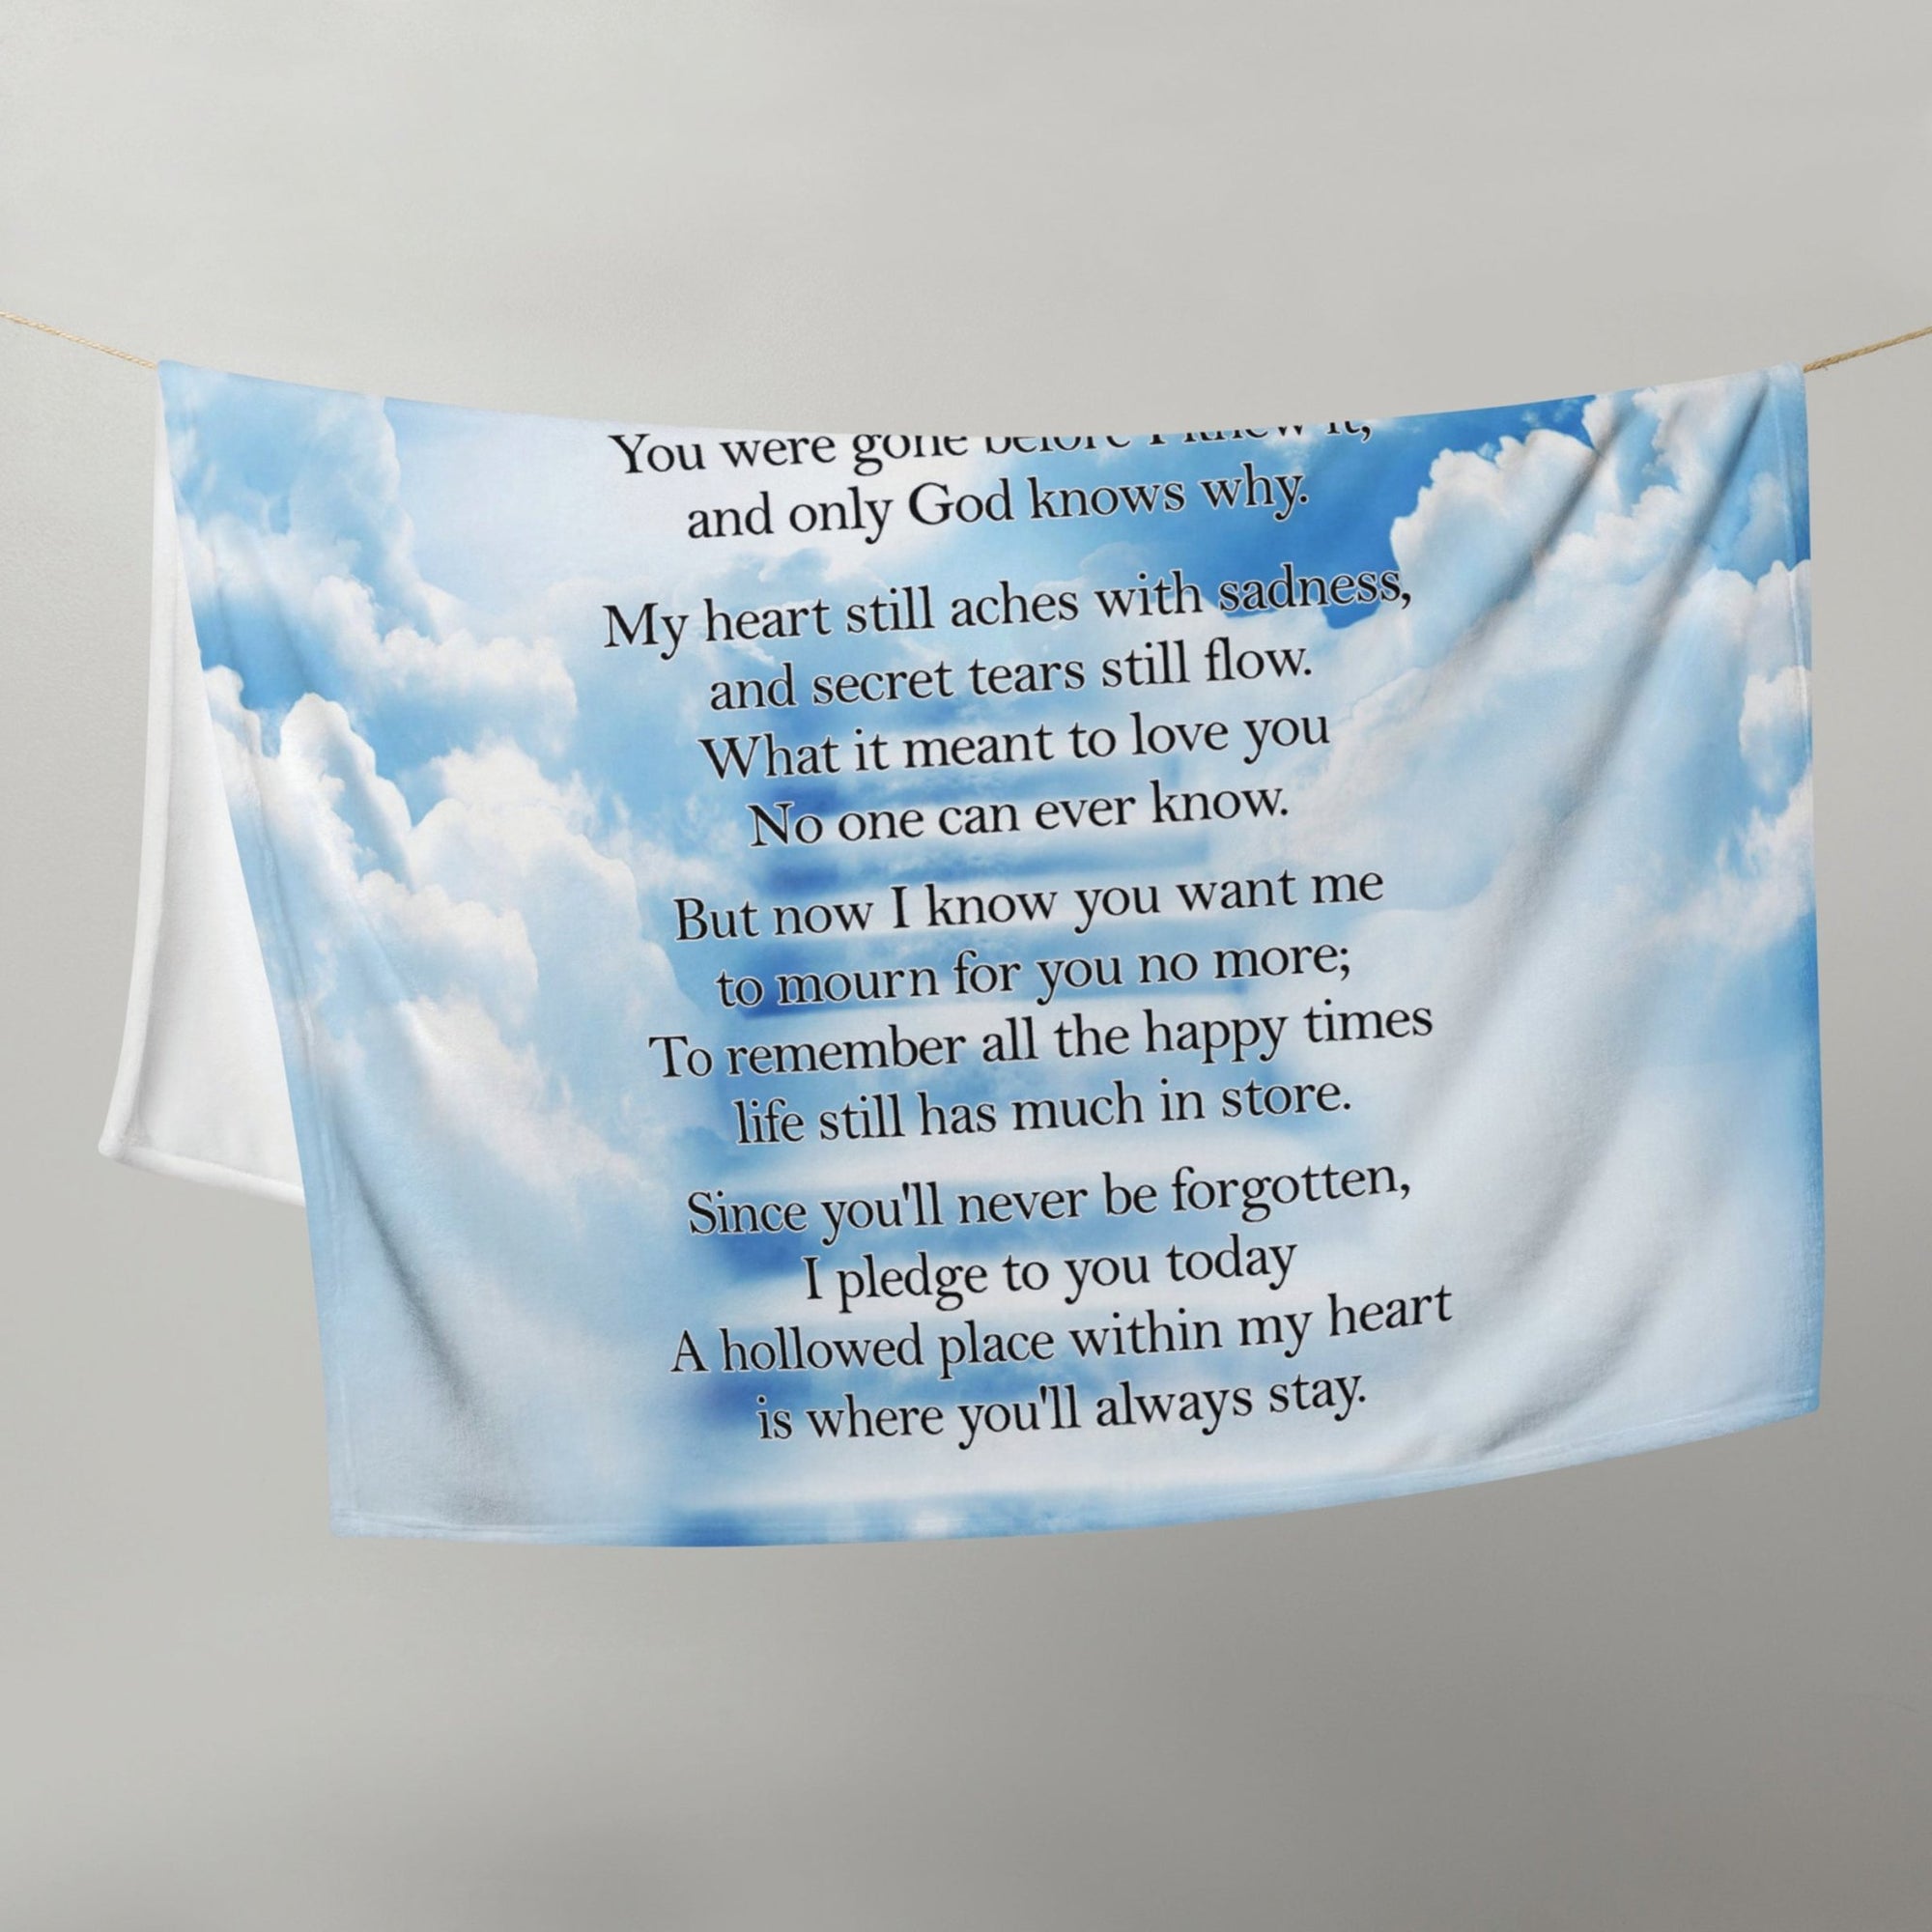 If Tears Could Build a Stairway to Heaven (Heaven) - Memorial White Decorative Throw Blanket For Home Décor Ideas - LifeSong Milestones